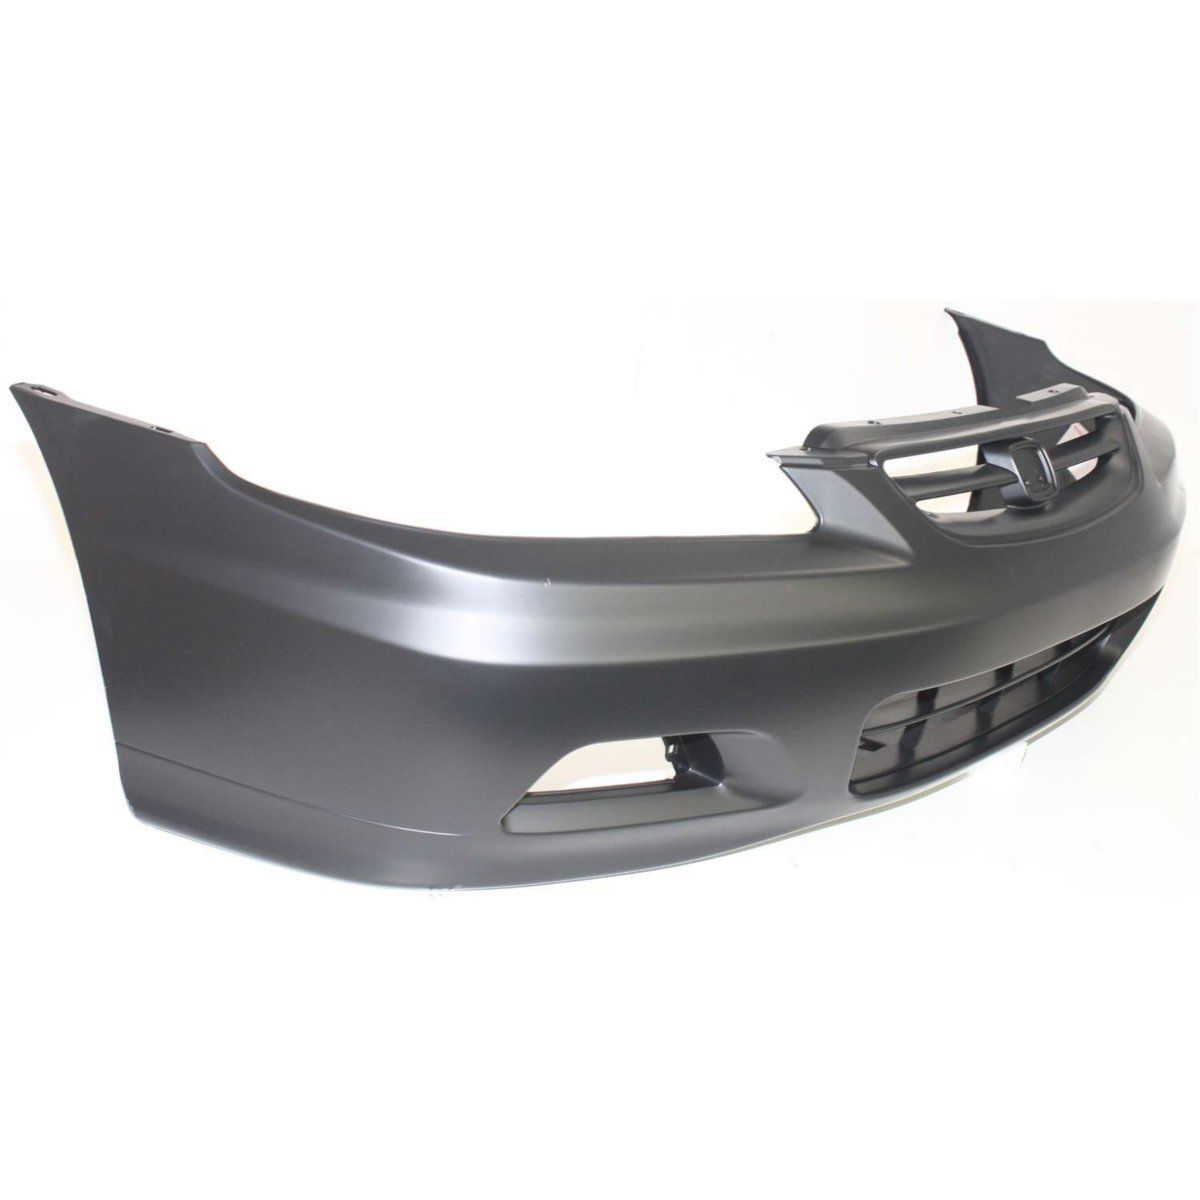 2001-2002 HONDA ACCORD Front Bumper Cover 2dr coupe Painted to Match